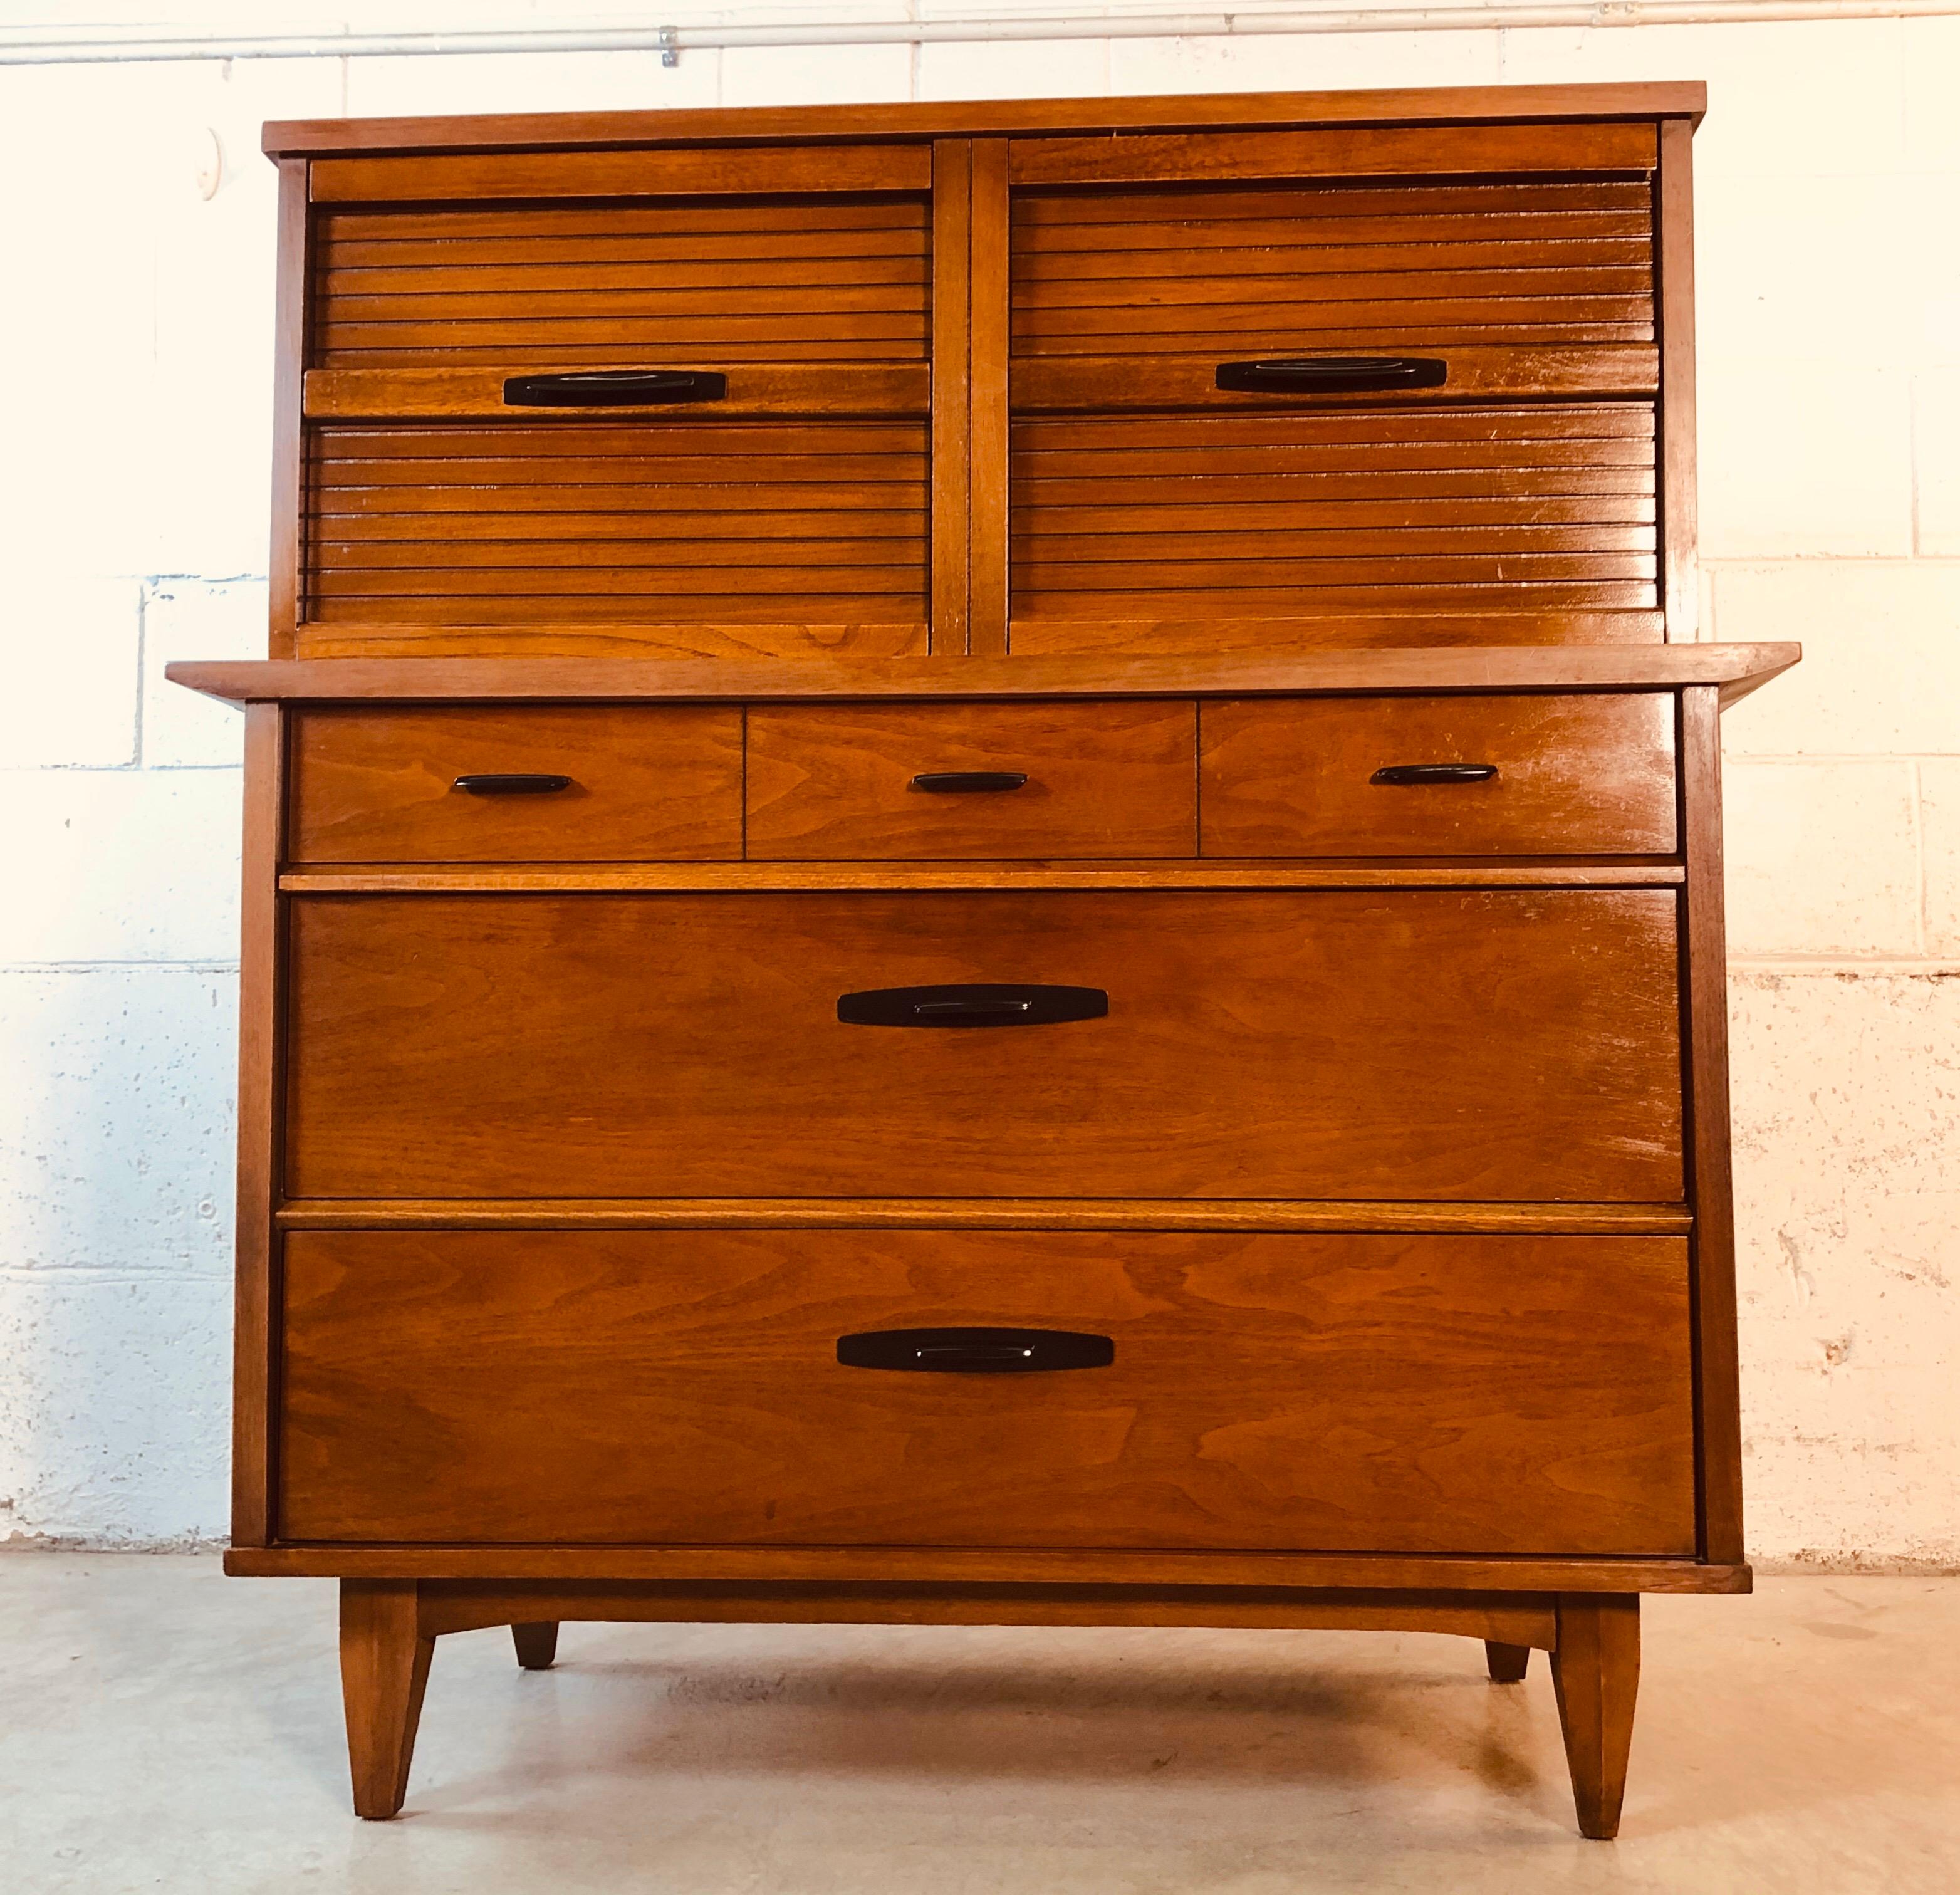 Vintage 1960s walnut wood tall bedroom dresser by Dixie Furniture Co. The dresser has seven drawers for storage. The bottom drawers are 6” H for amble storage. The dresser has been restored and is in excellent used condition. Marked in the drawer.